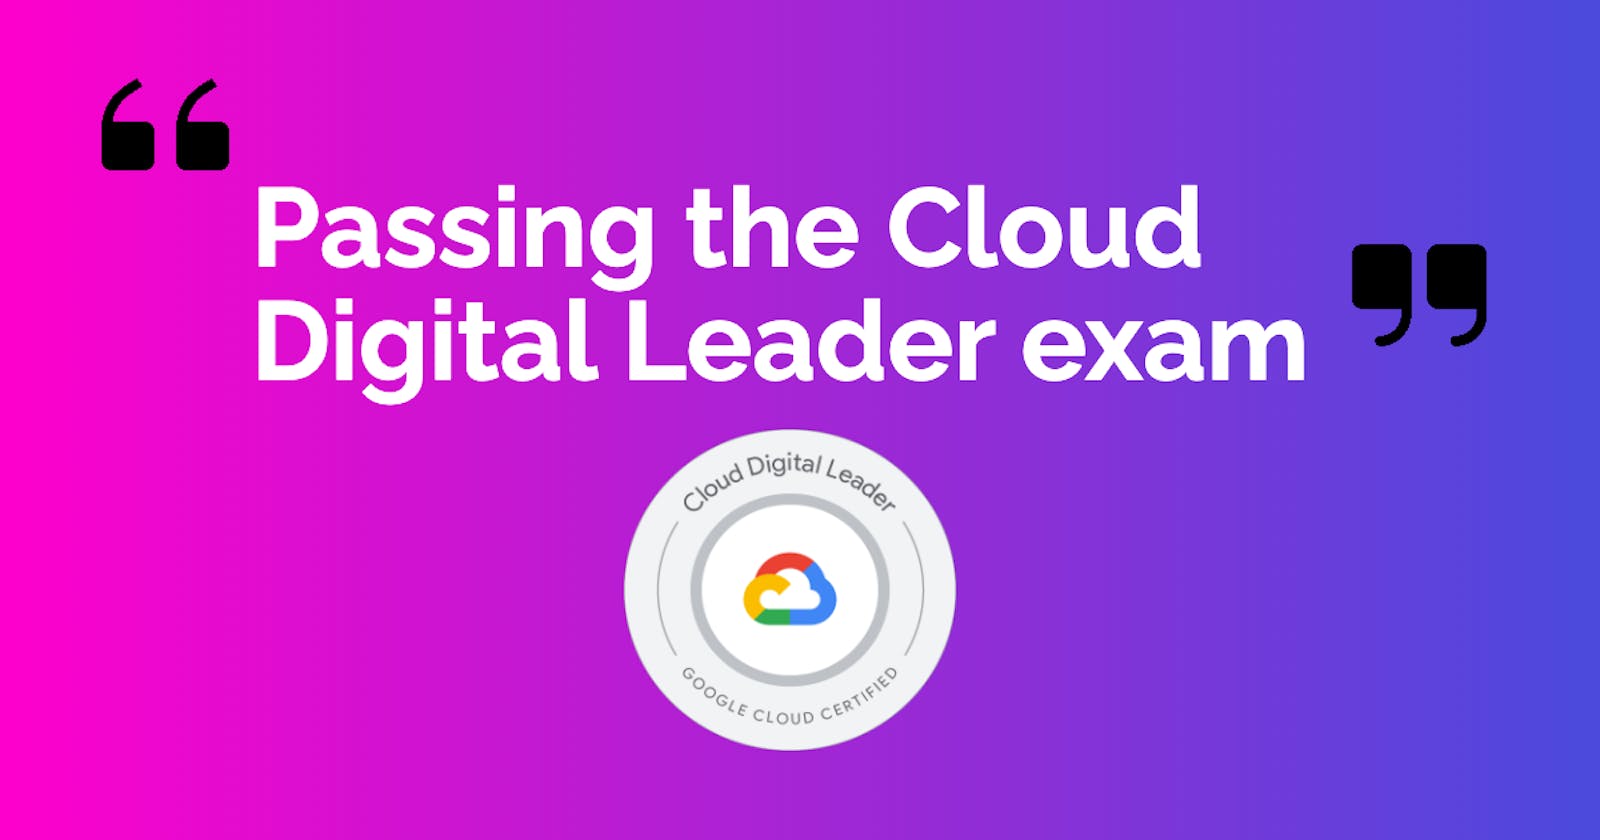 How I passed the Cloud Digital Leader exam